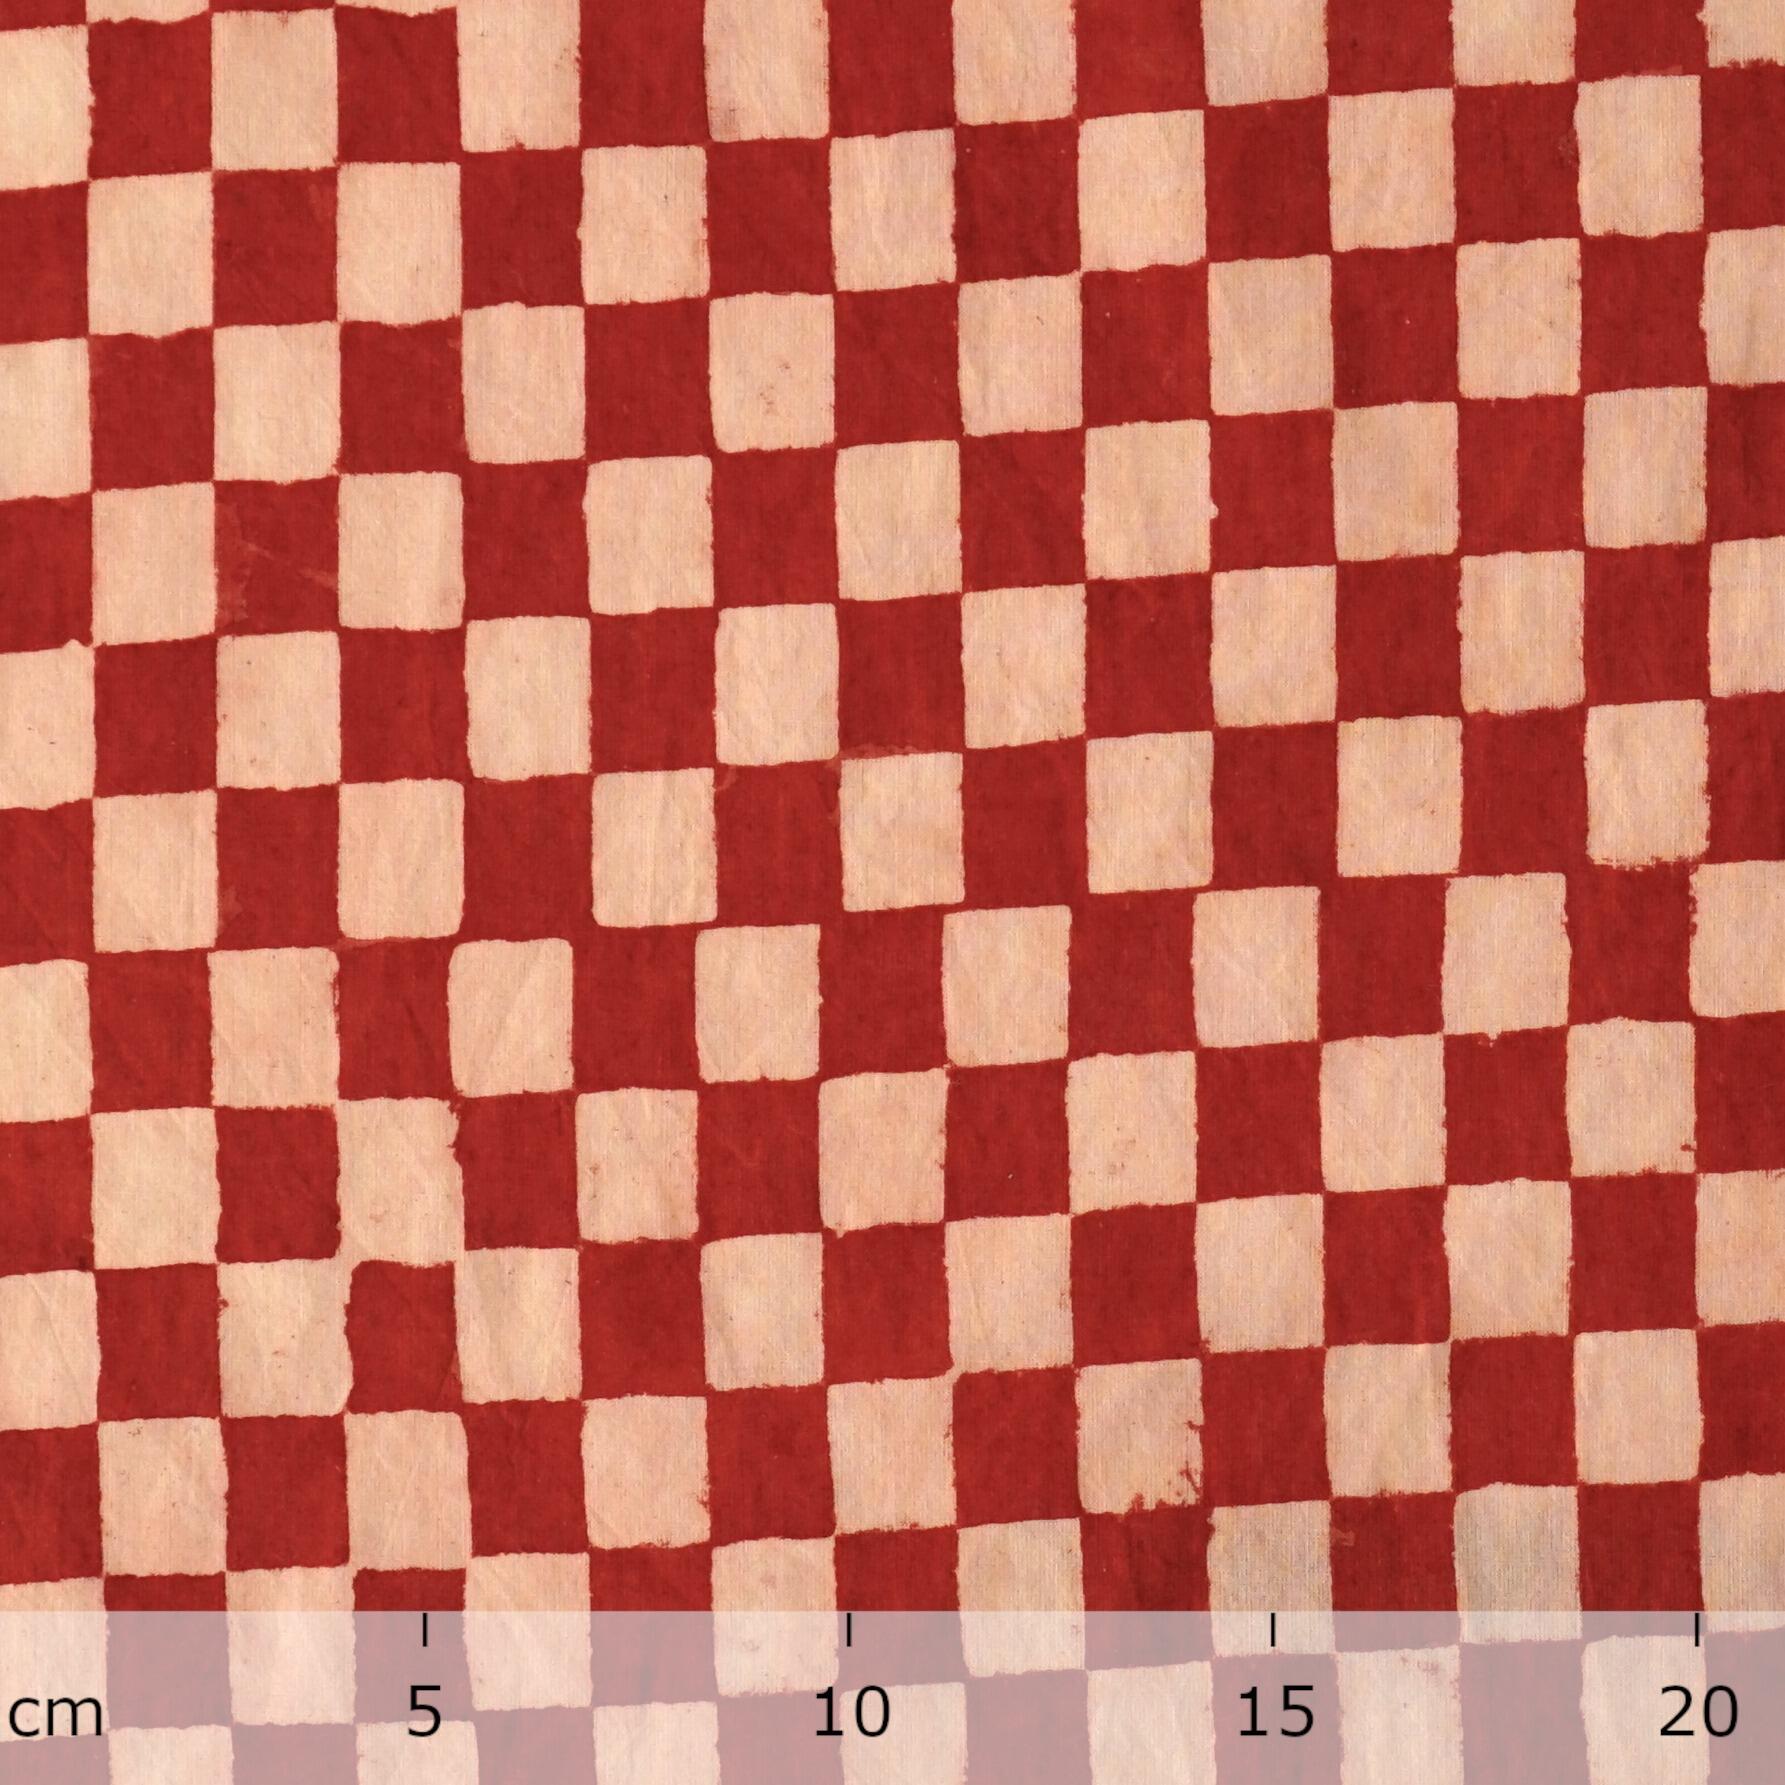 Hand Block-Printed Cotton - Checkers Print - Red Alizarin & White - Ruler